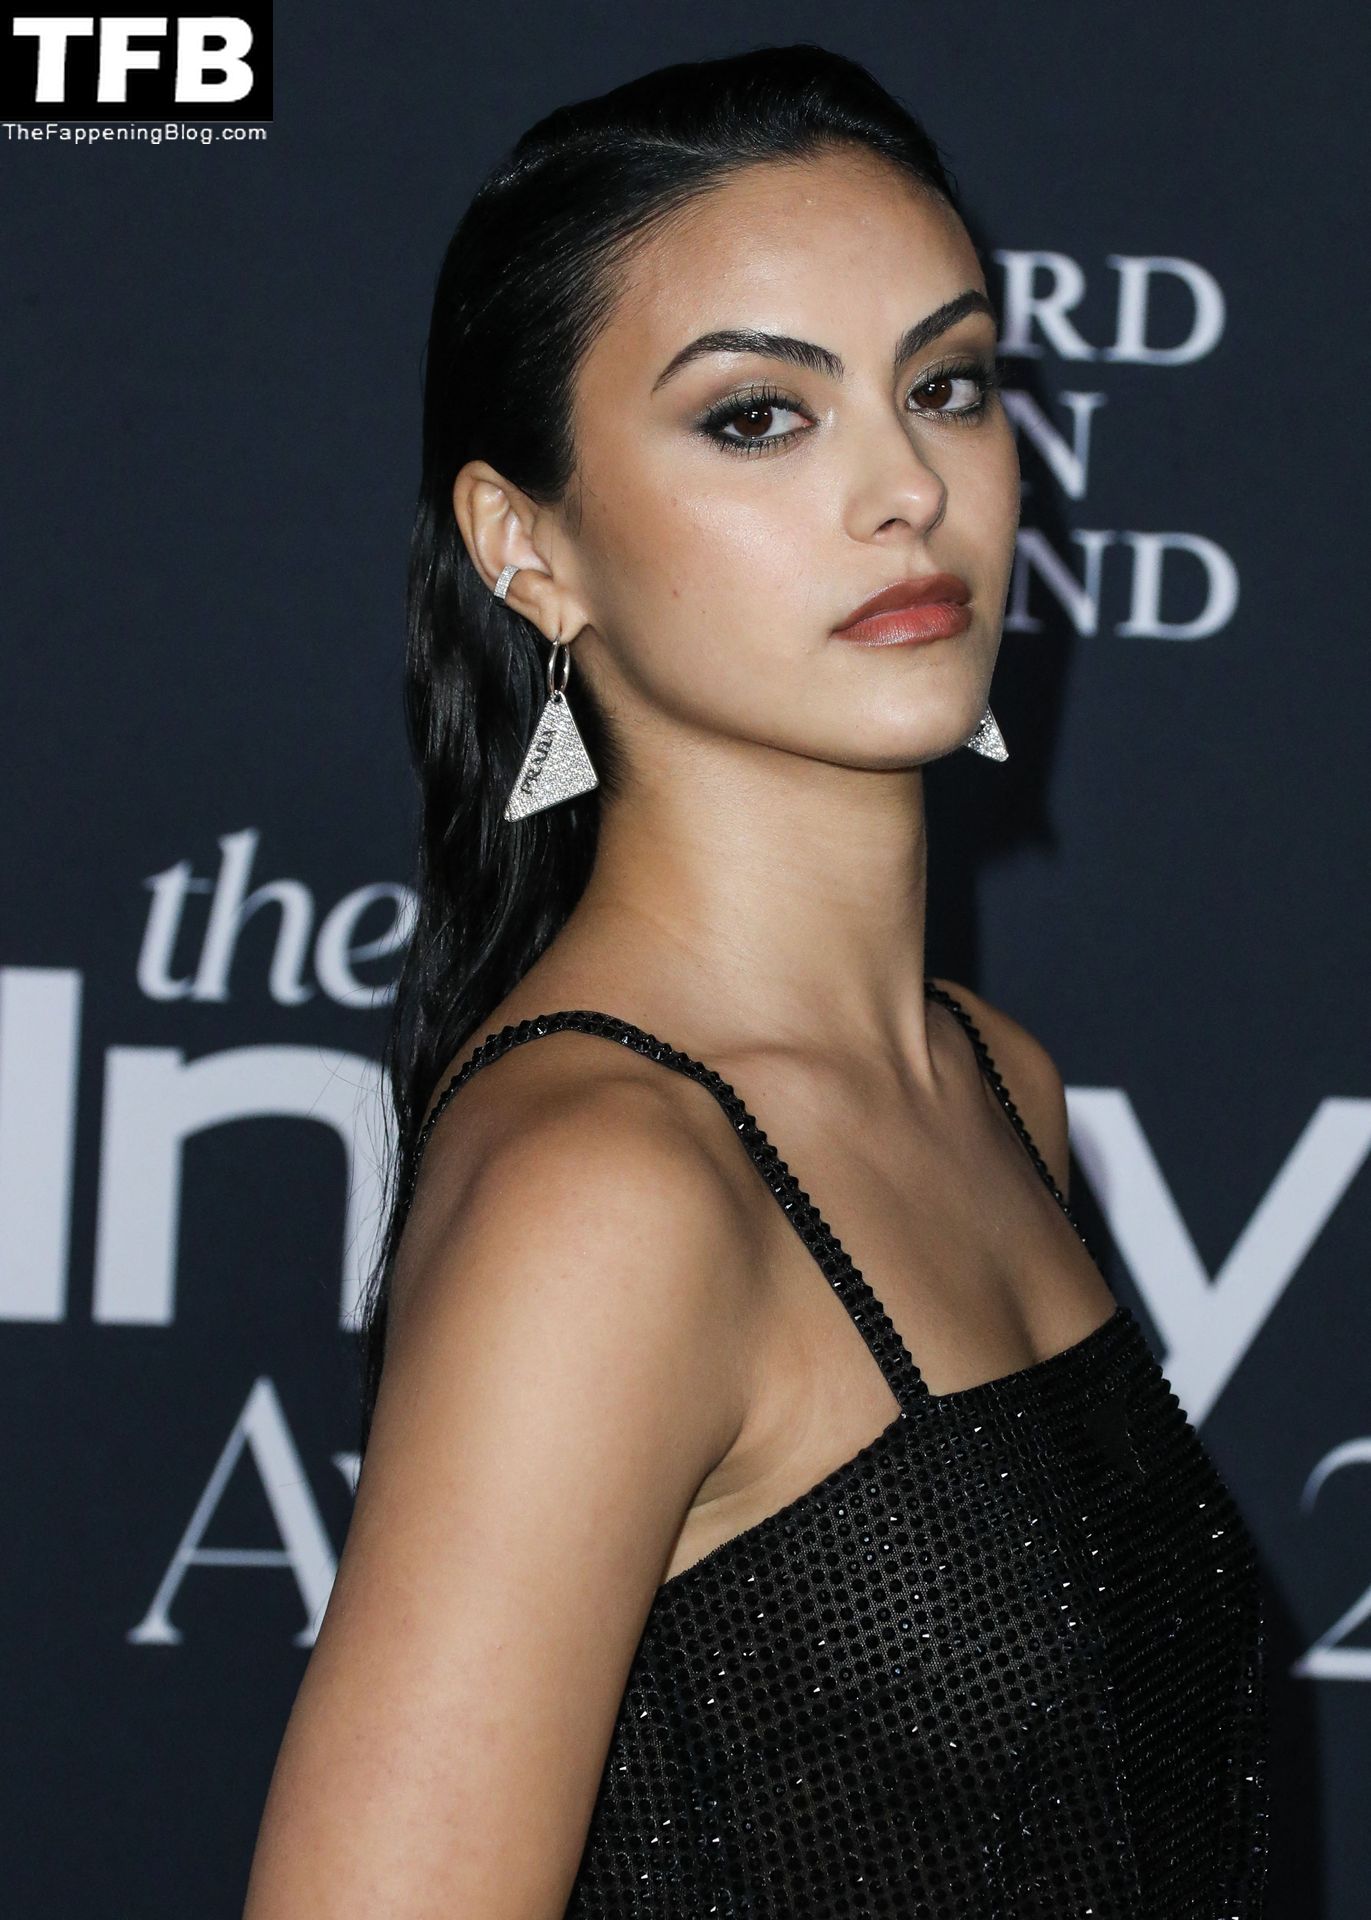 Camila-Mendes-See-Through-Tits-The-Fappening-Blog-14.jpg